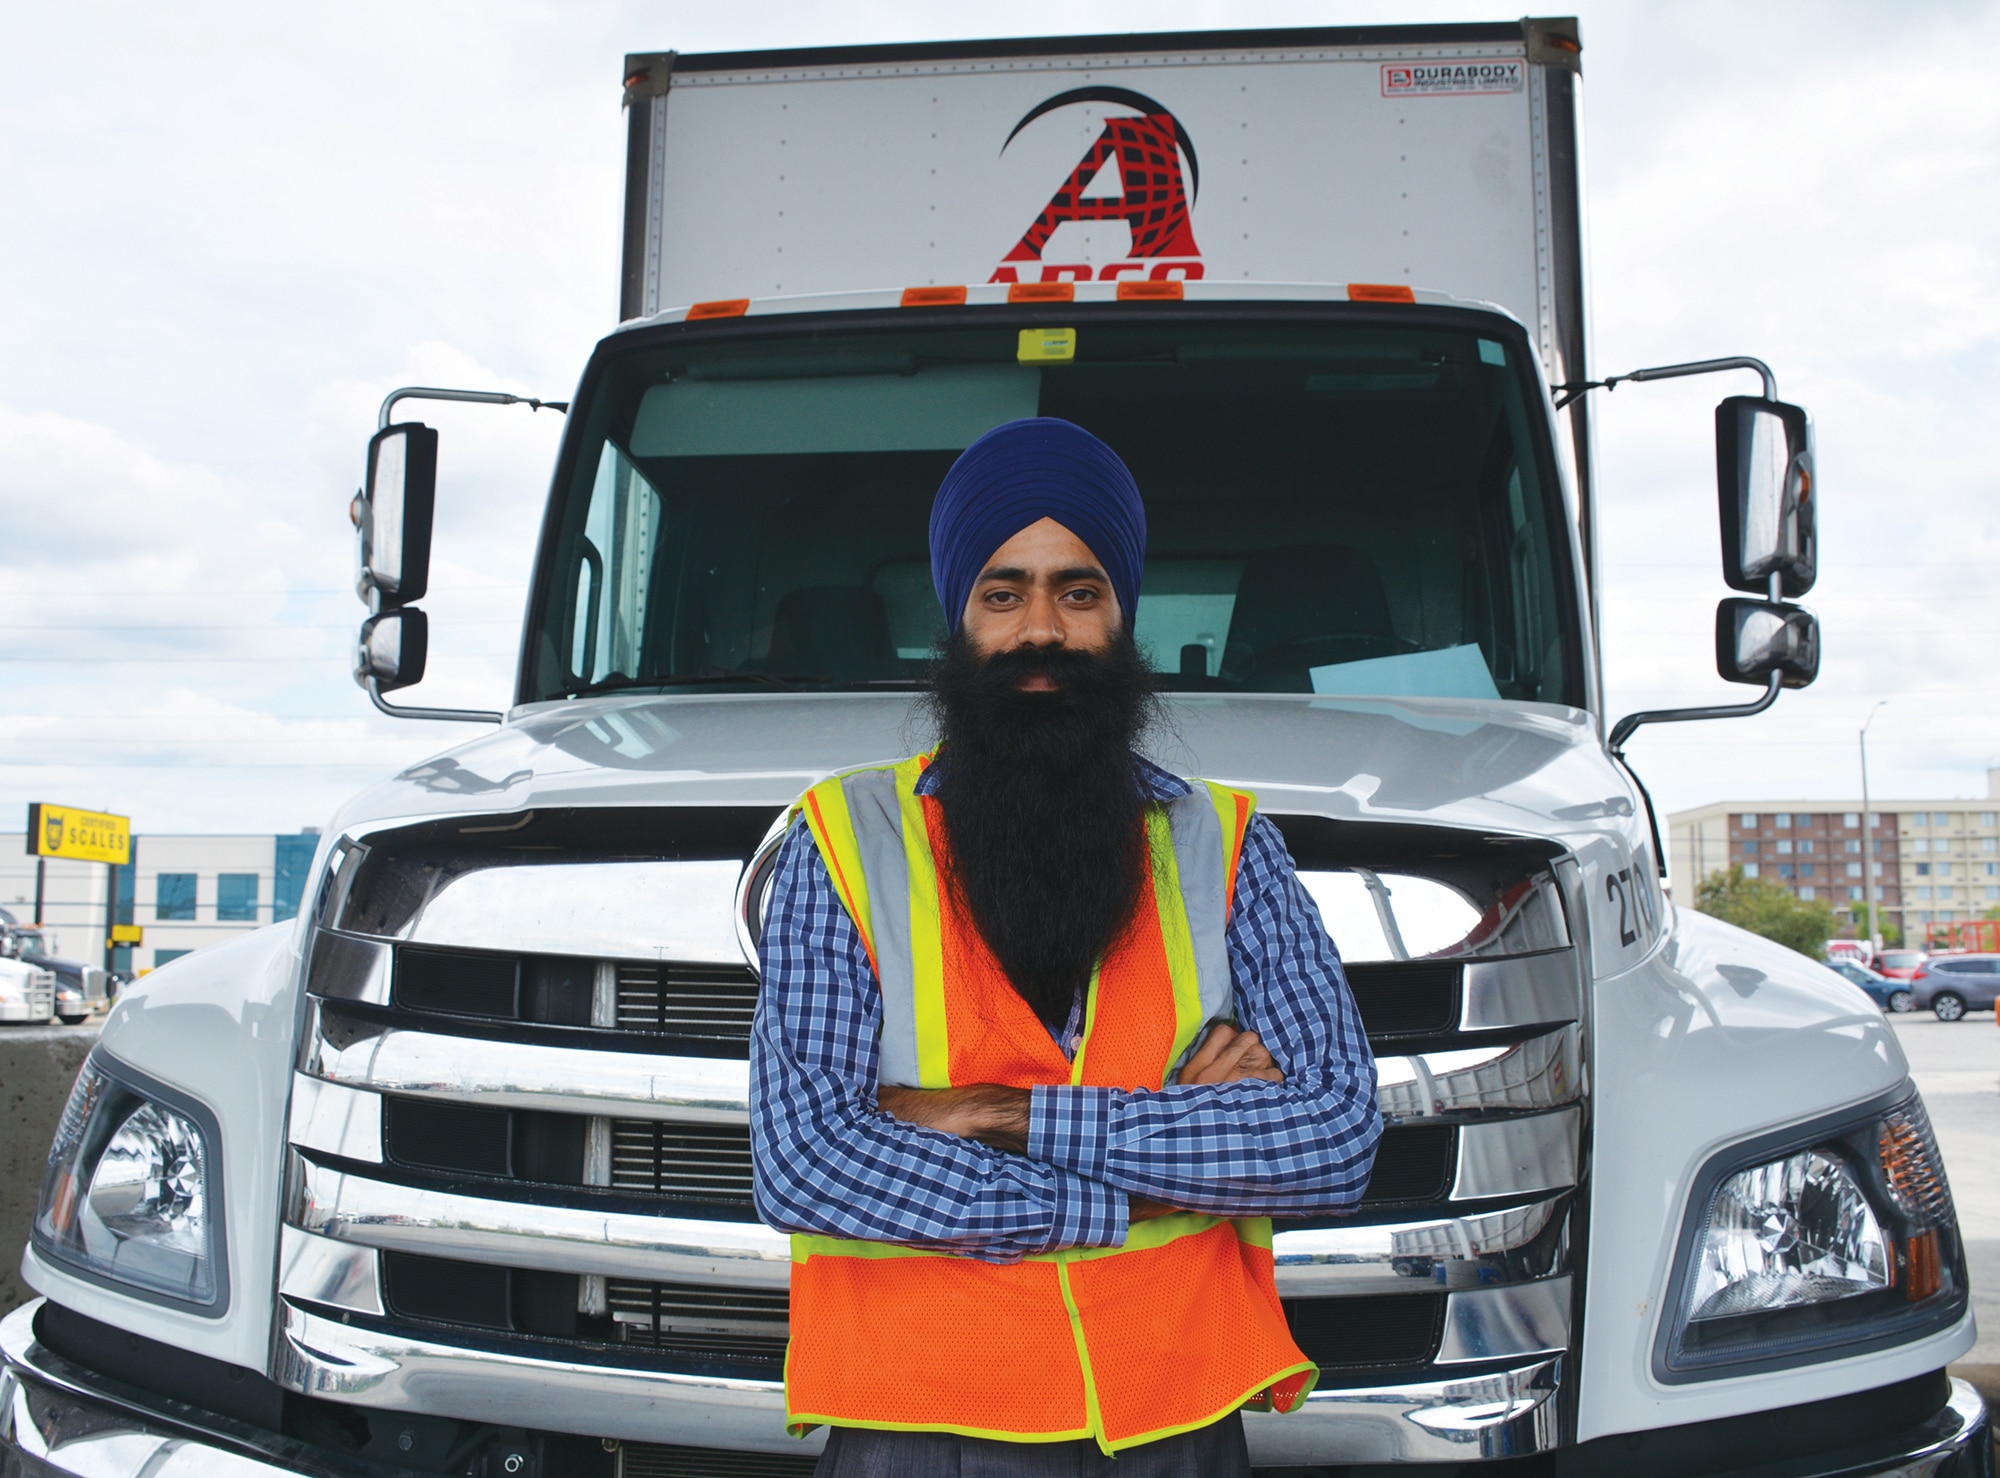 Canada's truck driver demographics are rapidly shifting.